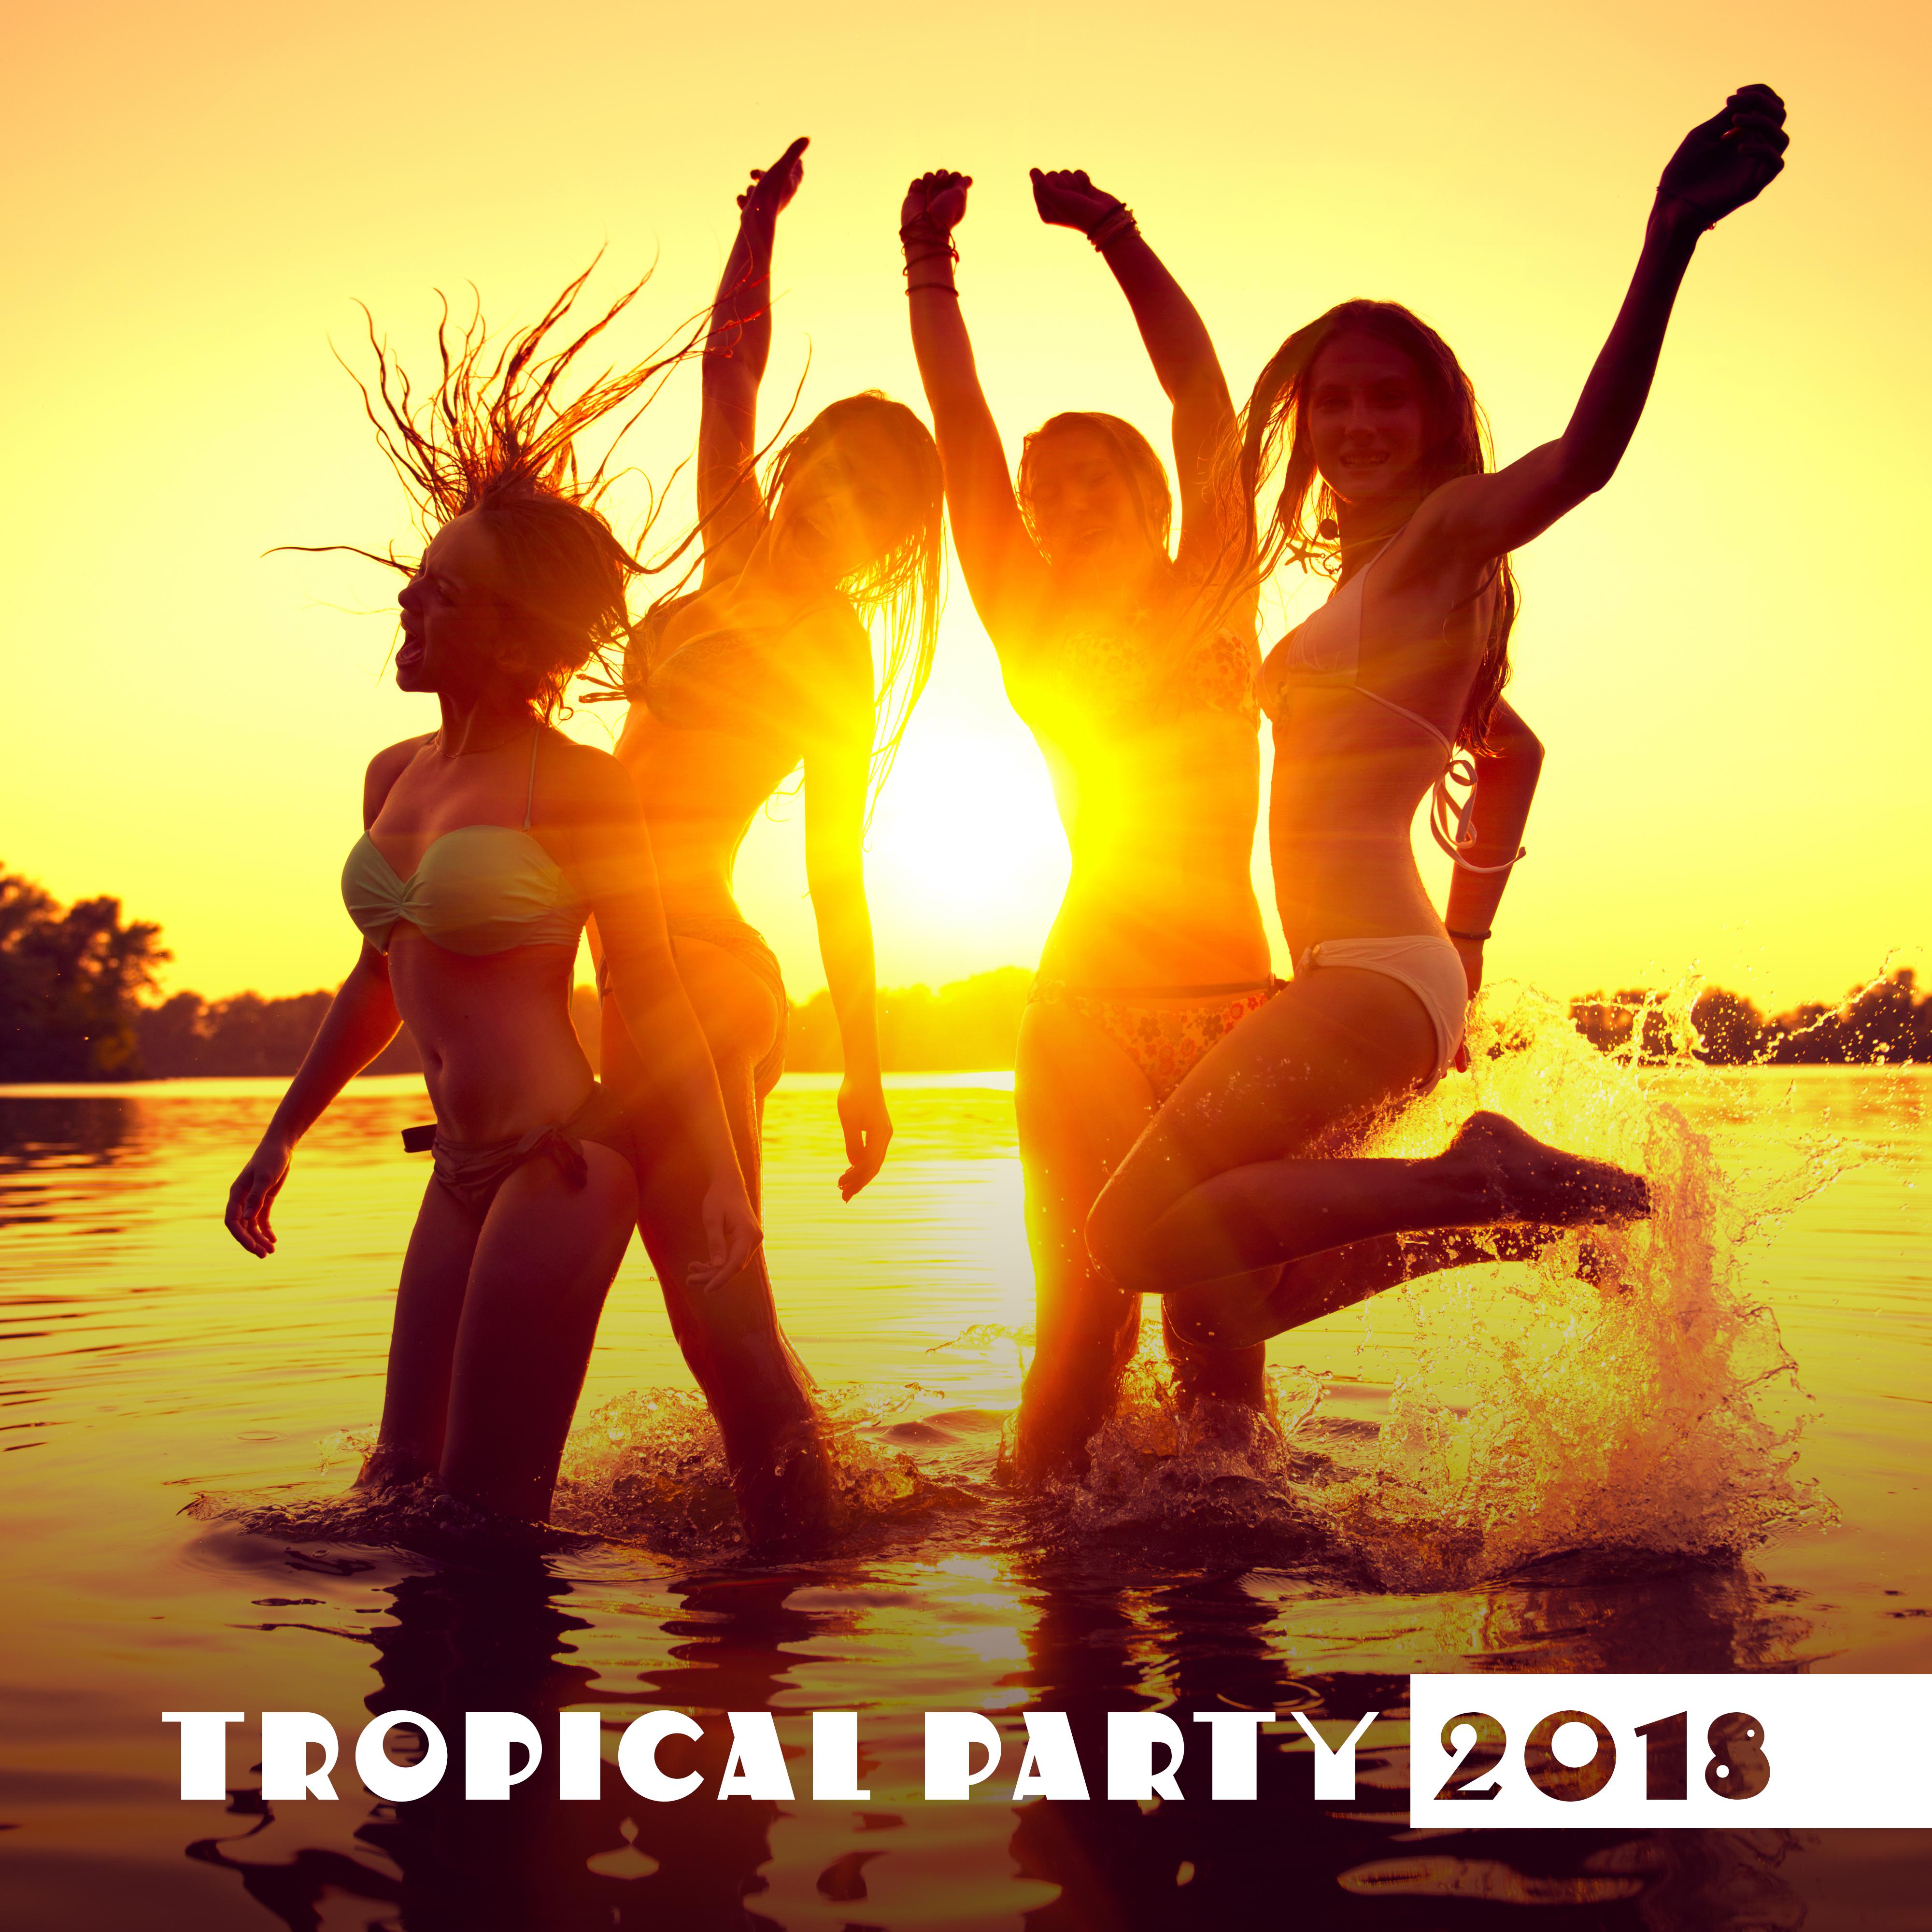 Tropical Party 2018